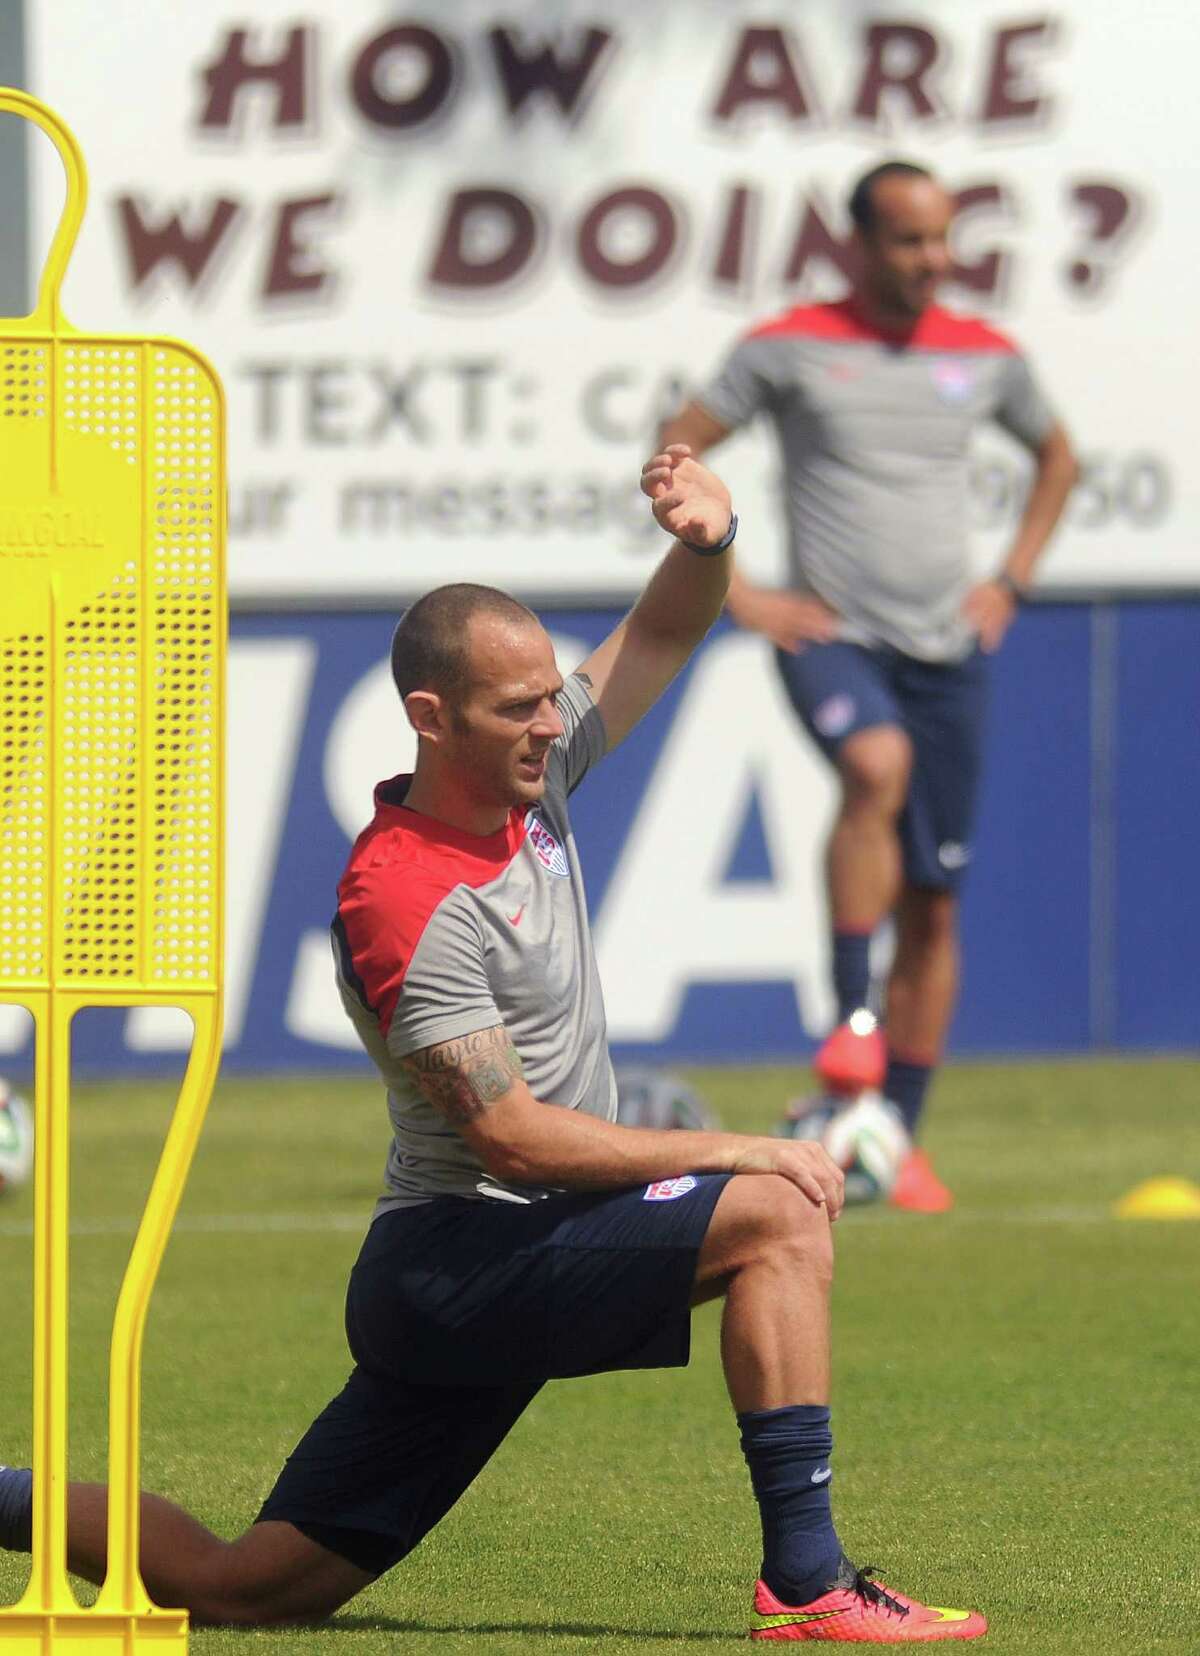 Brad Davis of The United States Men's National Soccer Team practice at Stanford Stadium in Stanford, California on May 16, 2014. The Brazil World Cup opens on June 12, 2014. AFP PHOTO/JOSH EDELSONJosh Edelson/AFP/Getty Images